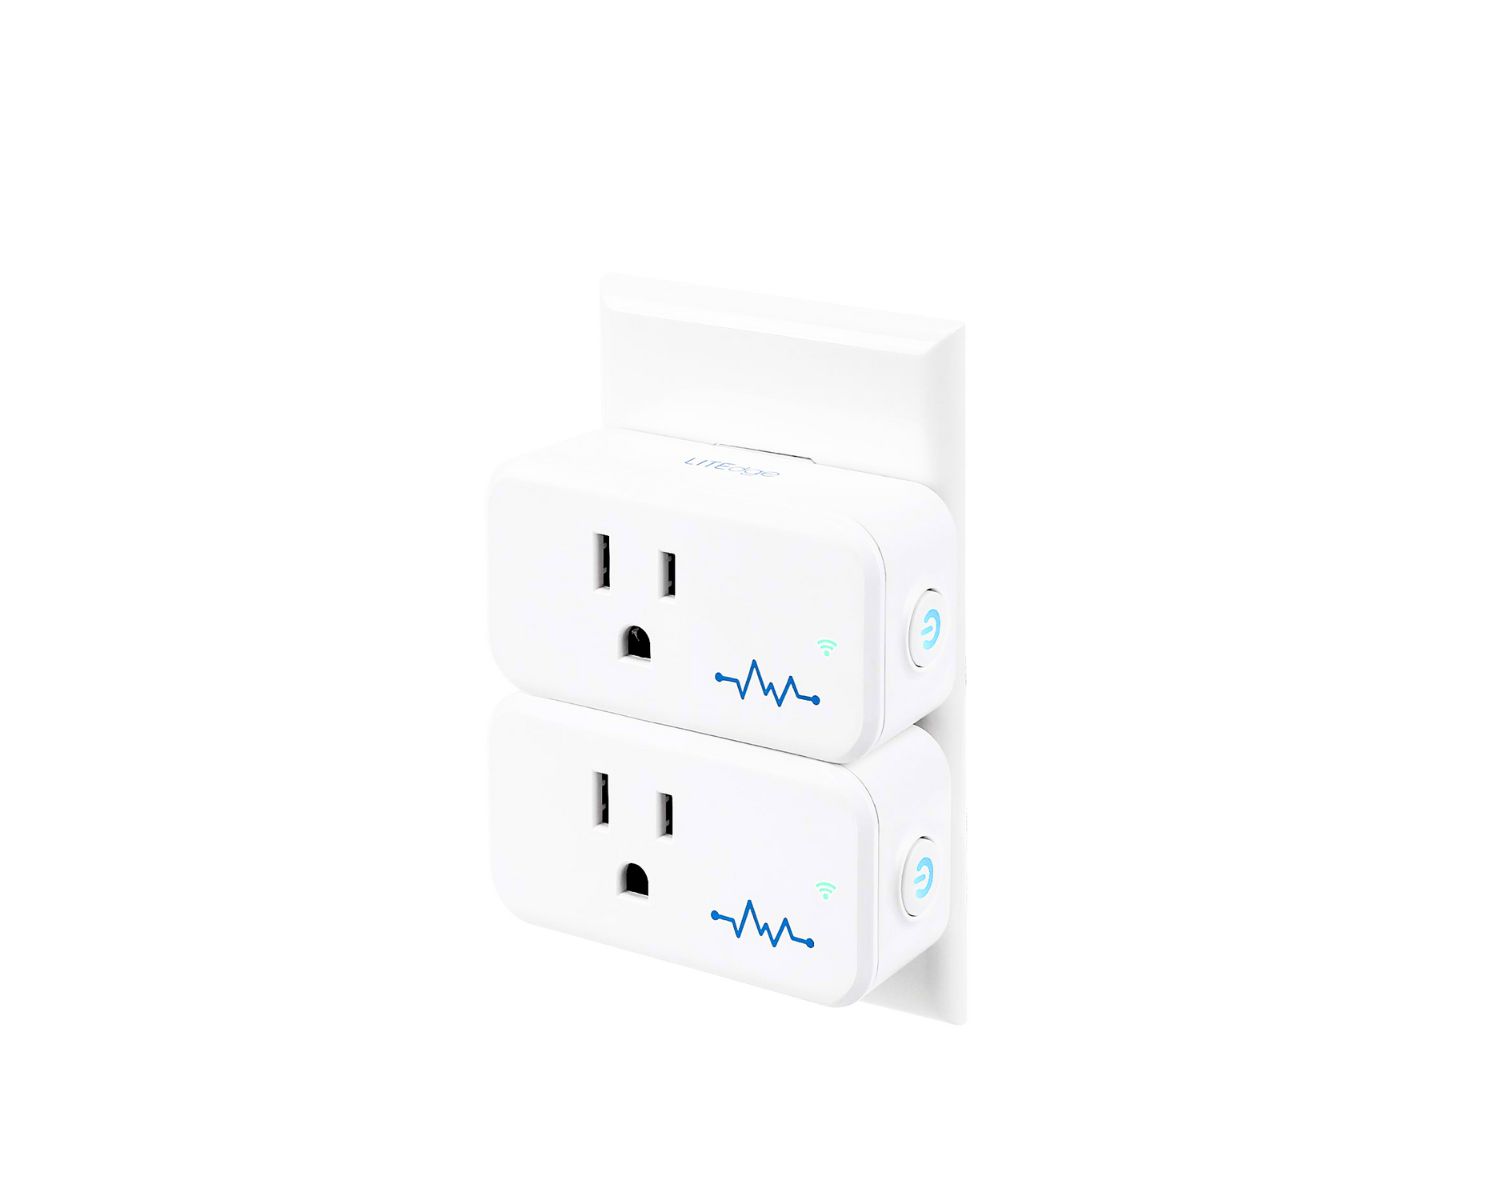 GE Lighting Cync Indoor Smart Plug 3 Pack, Bluetooth and Wi-Fi Outlet Socket